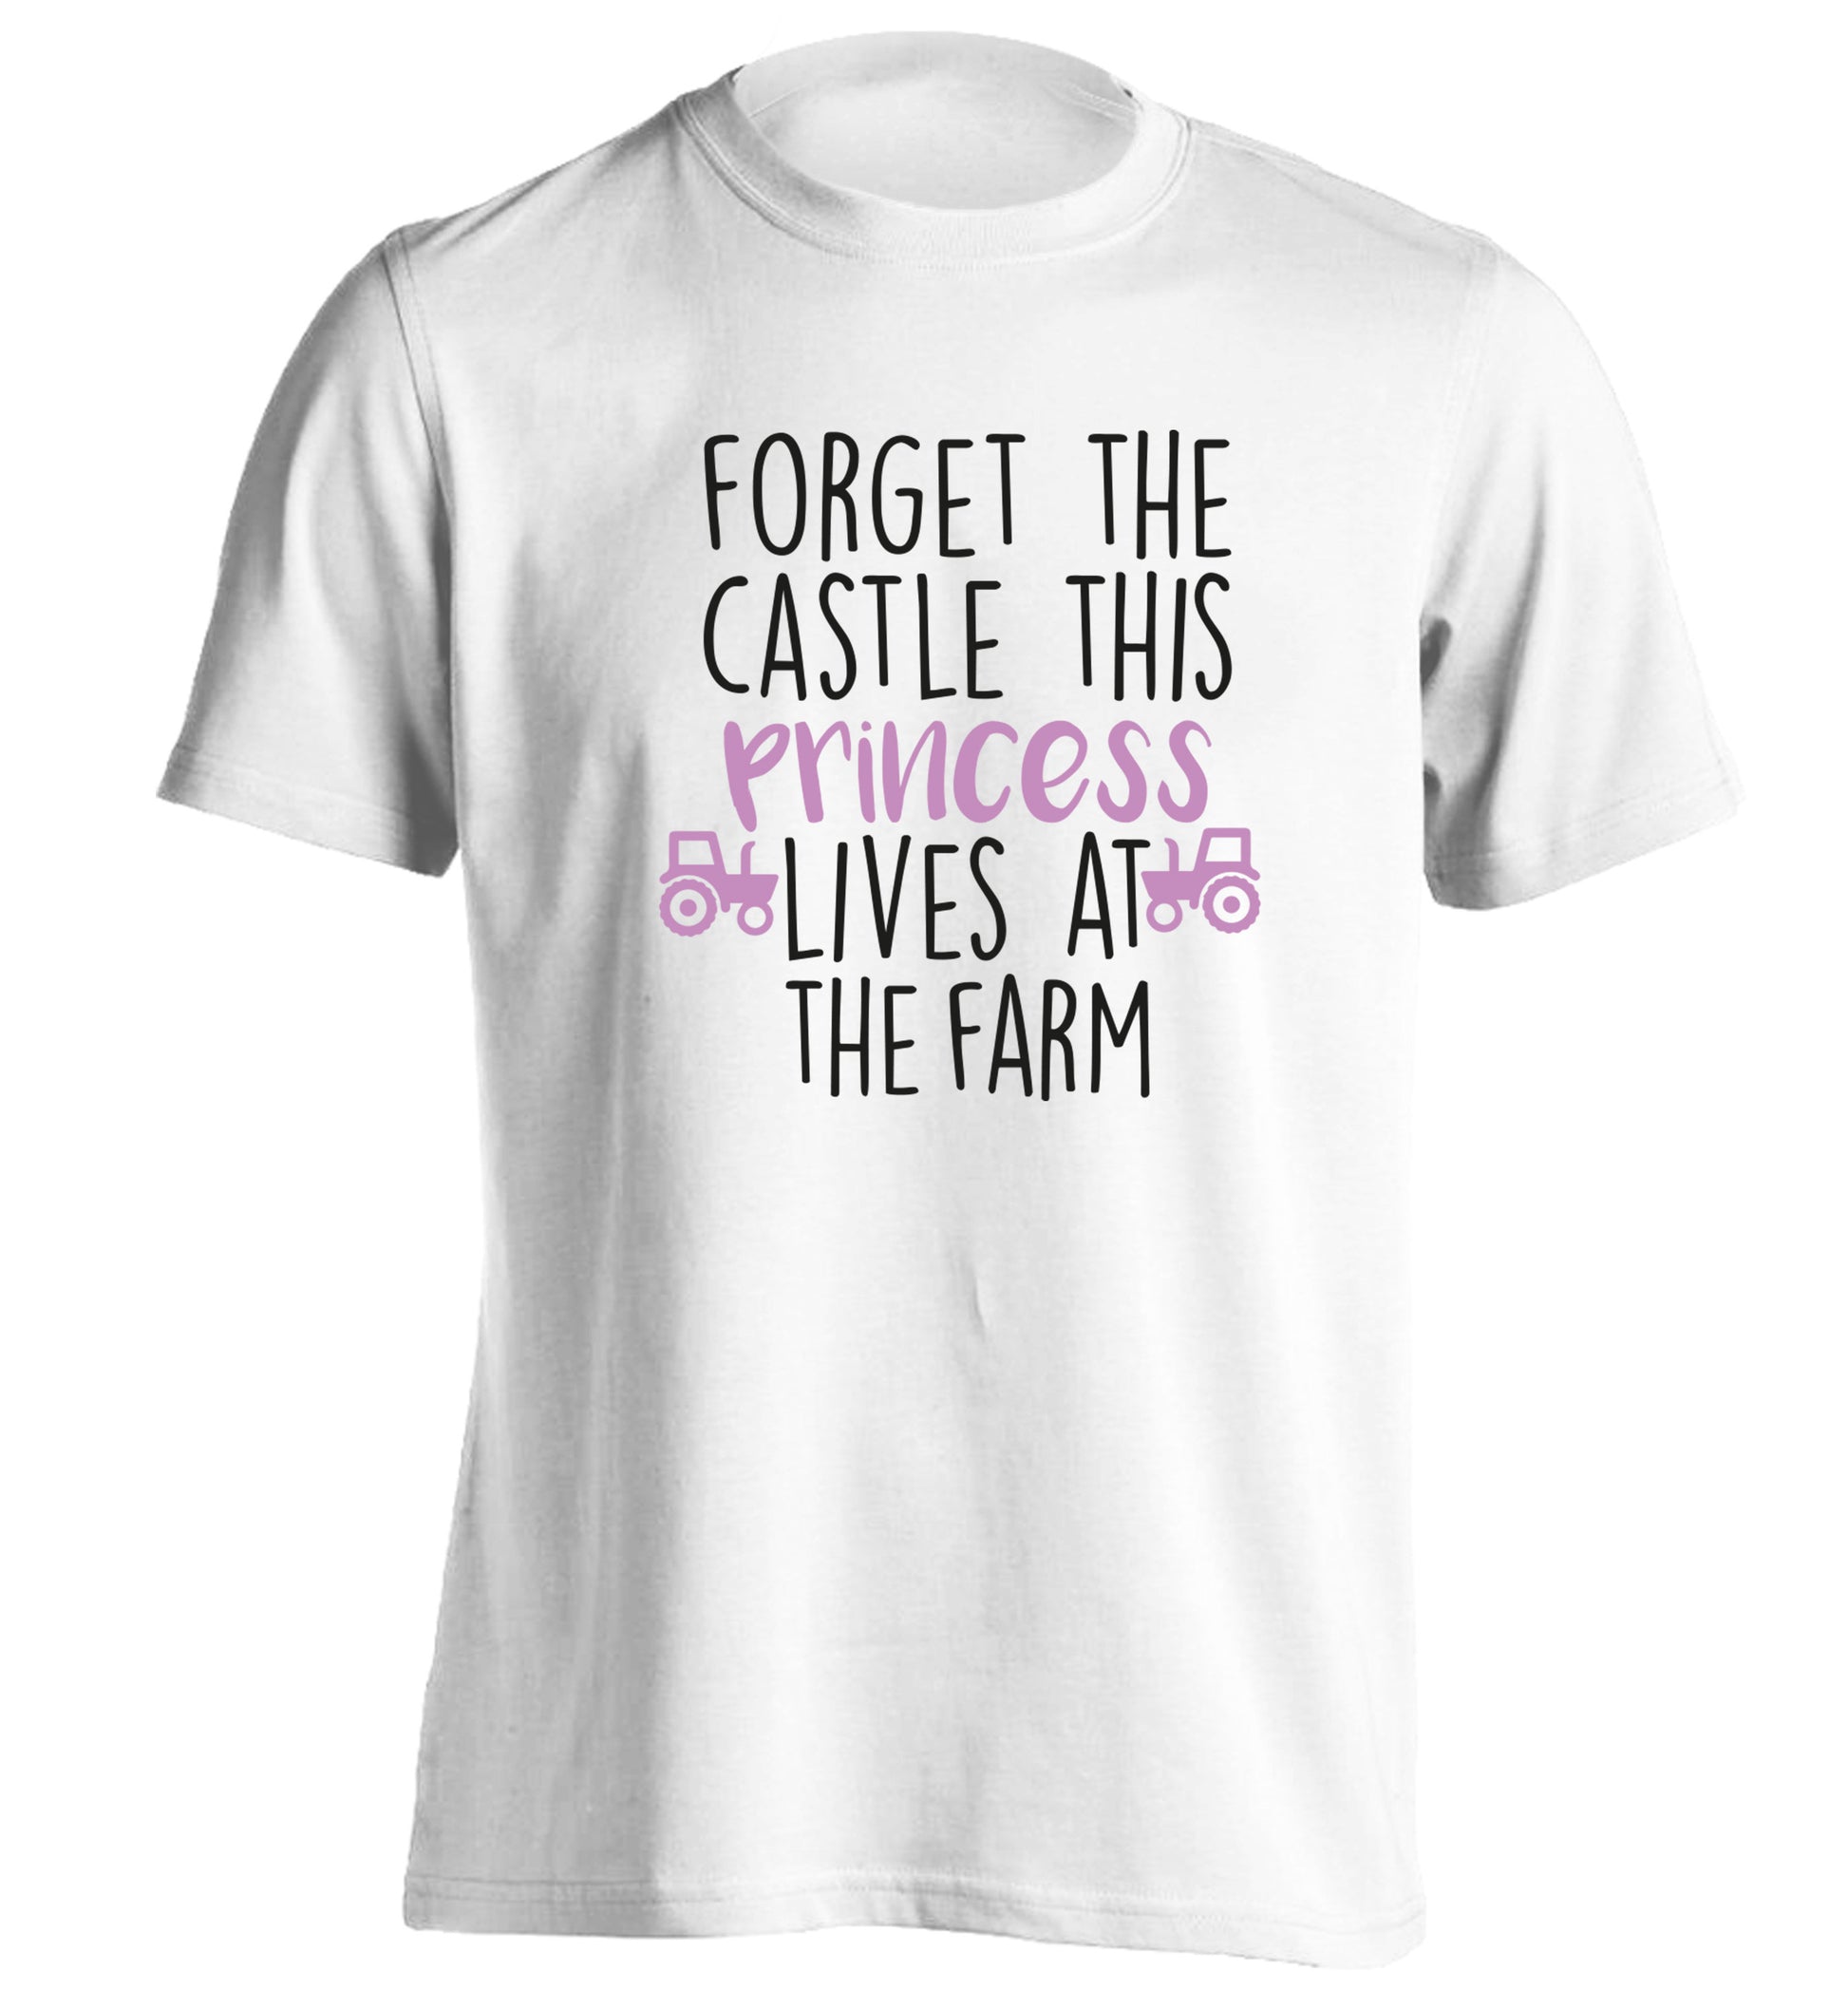 Forget the castle this princess lives at the farm adults unisex white Tshirt 2XL